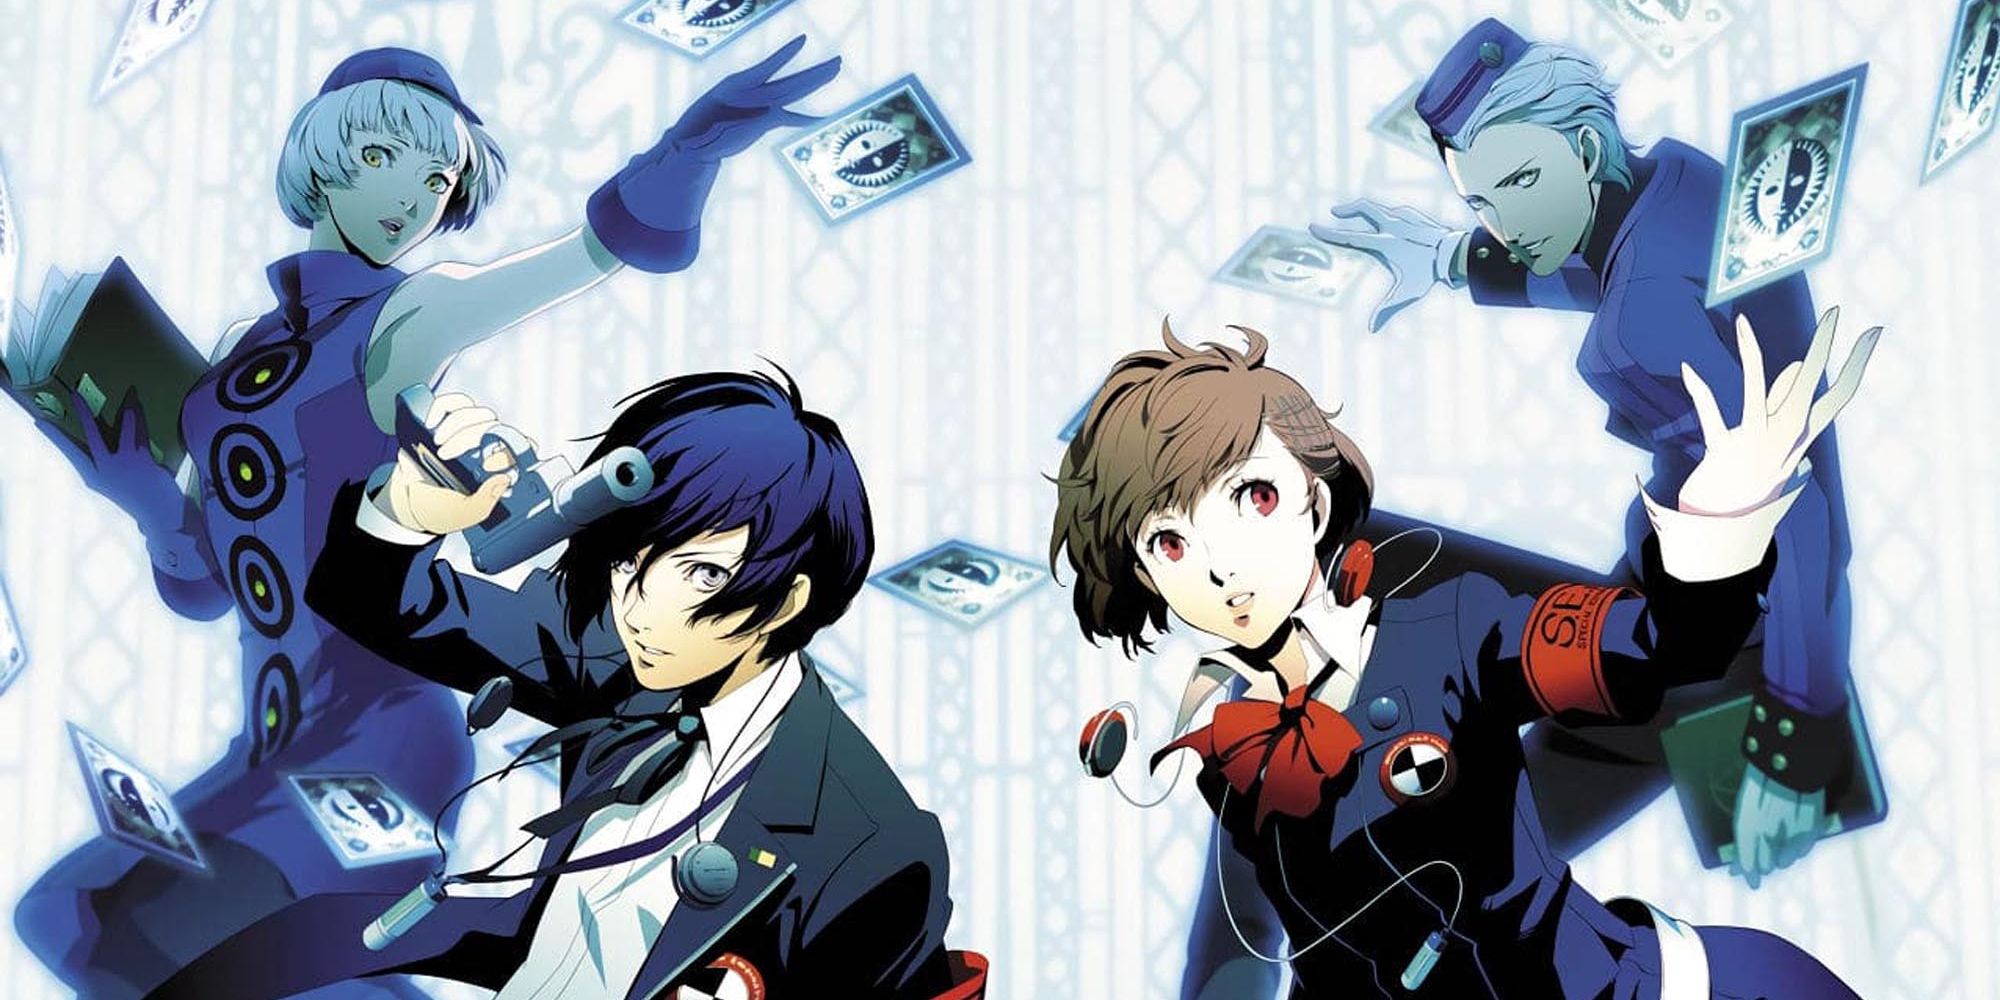 The male and female Persona 3 protagonists with Elizabeth and Theodore in the background